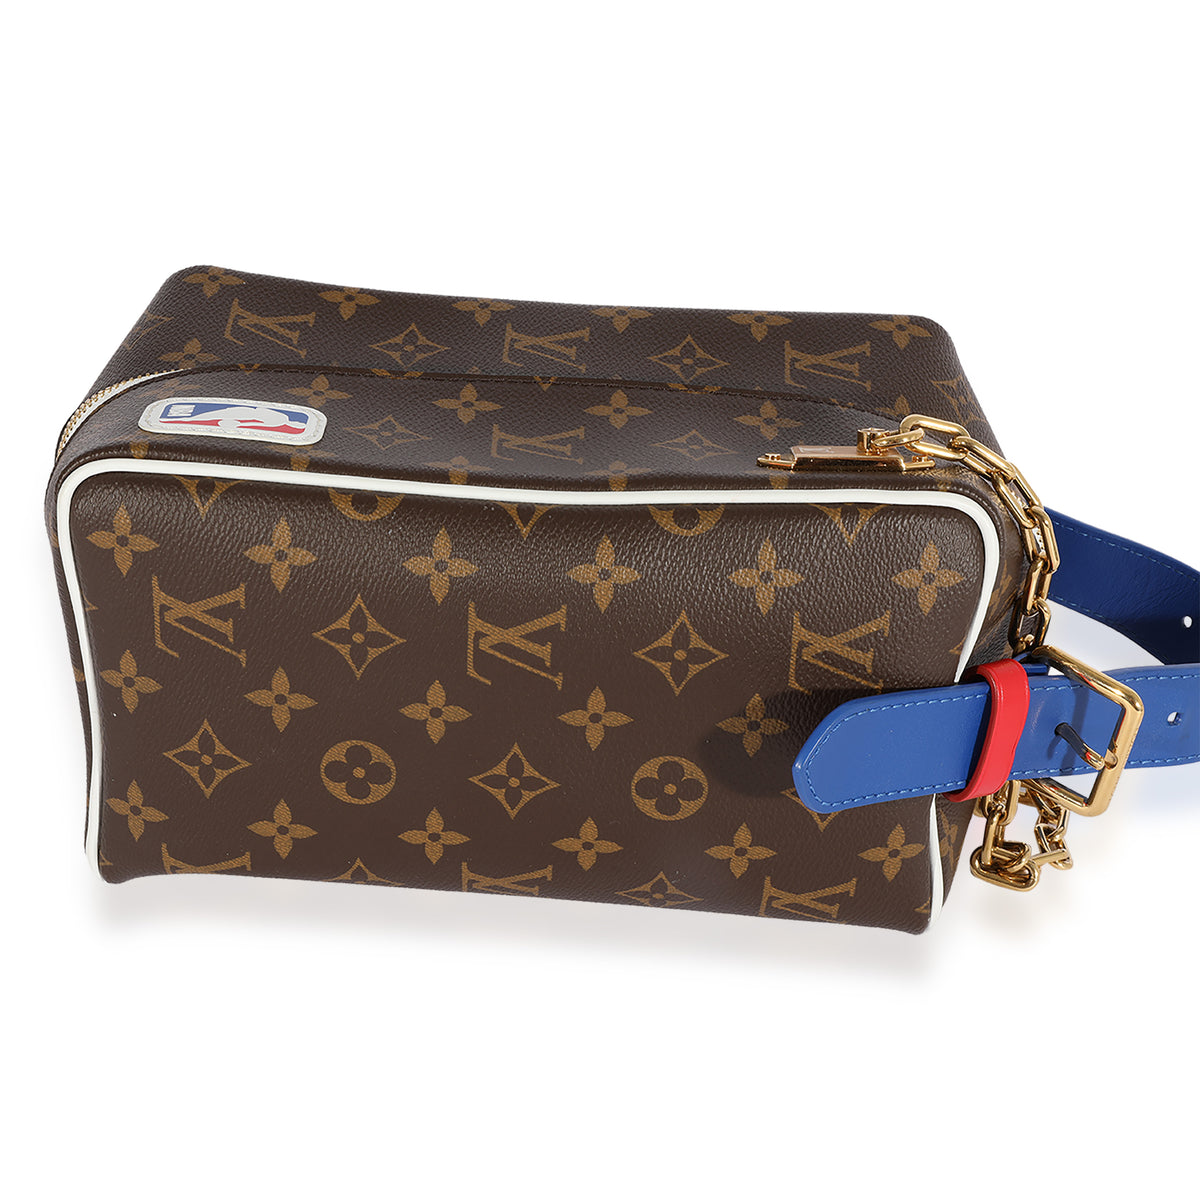 Louis Vuitton x NBA New Backpack Monogram in Coated Canvas with